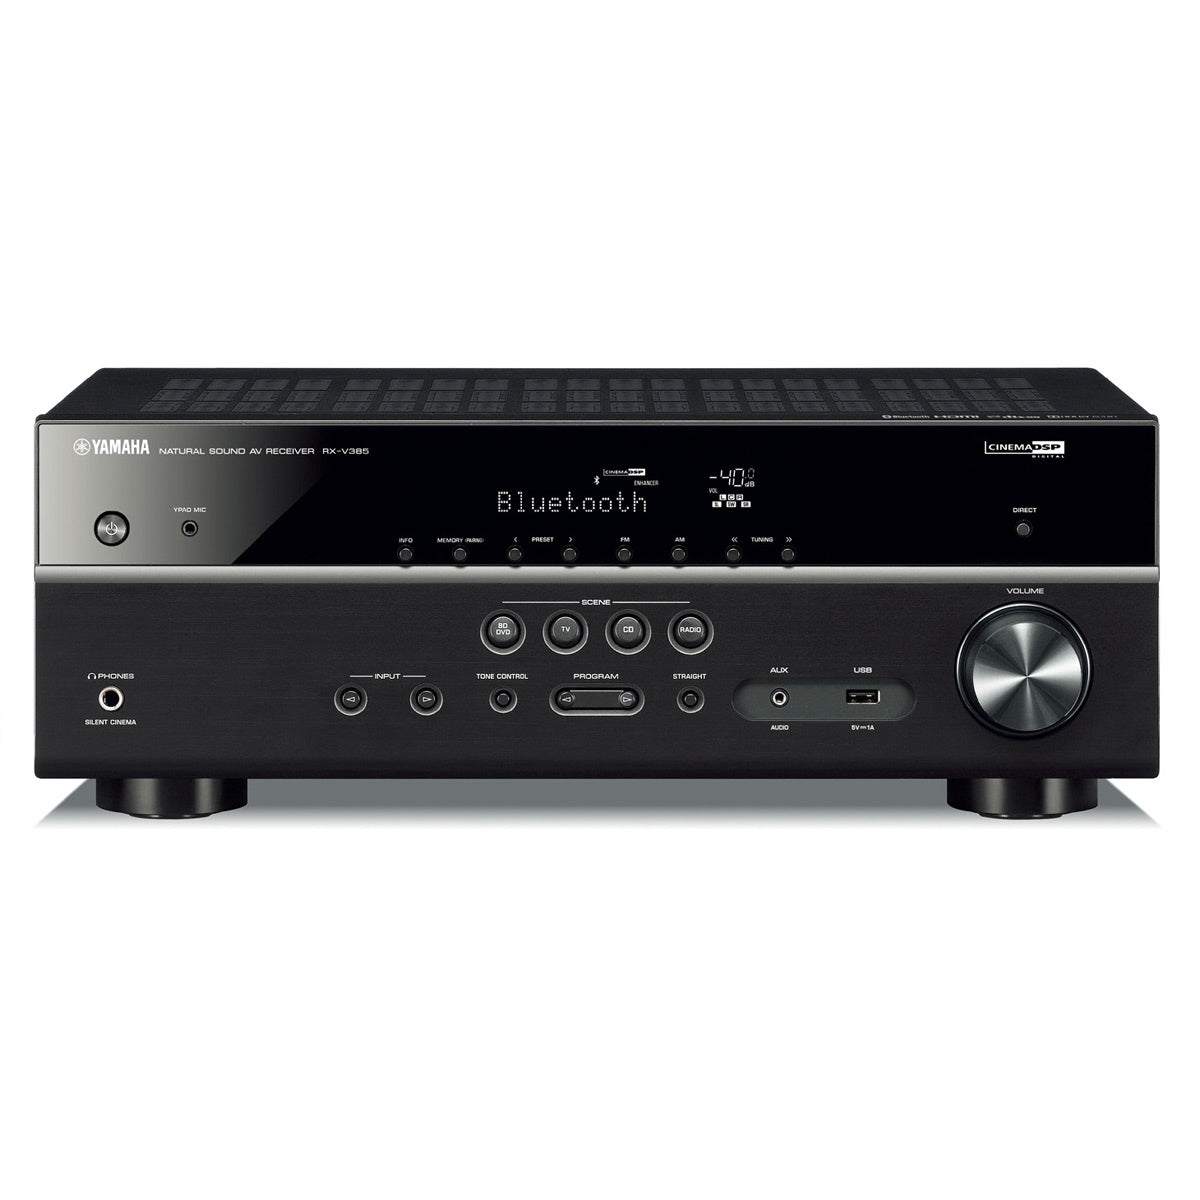 MusicCast NP-S303 - Overview - HiFi Components - Audio & Visual